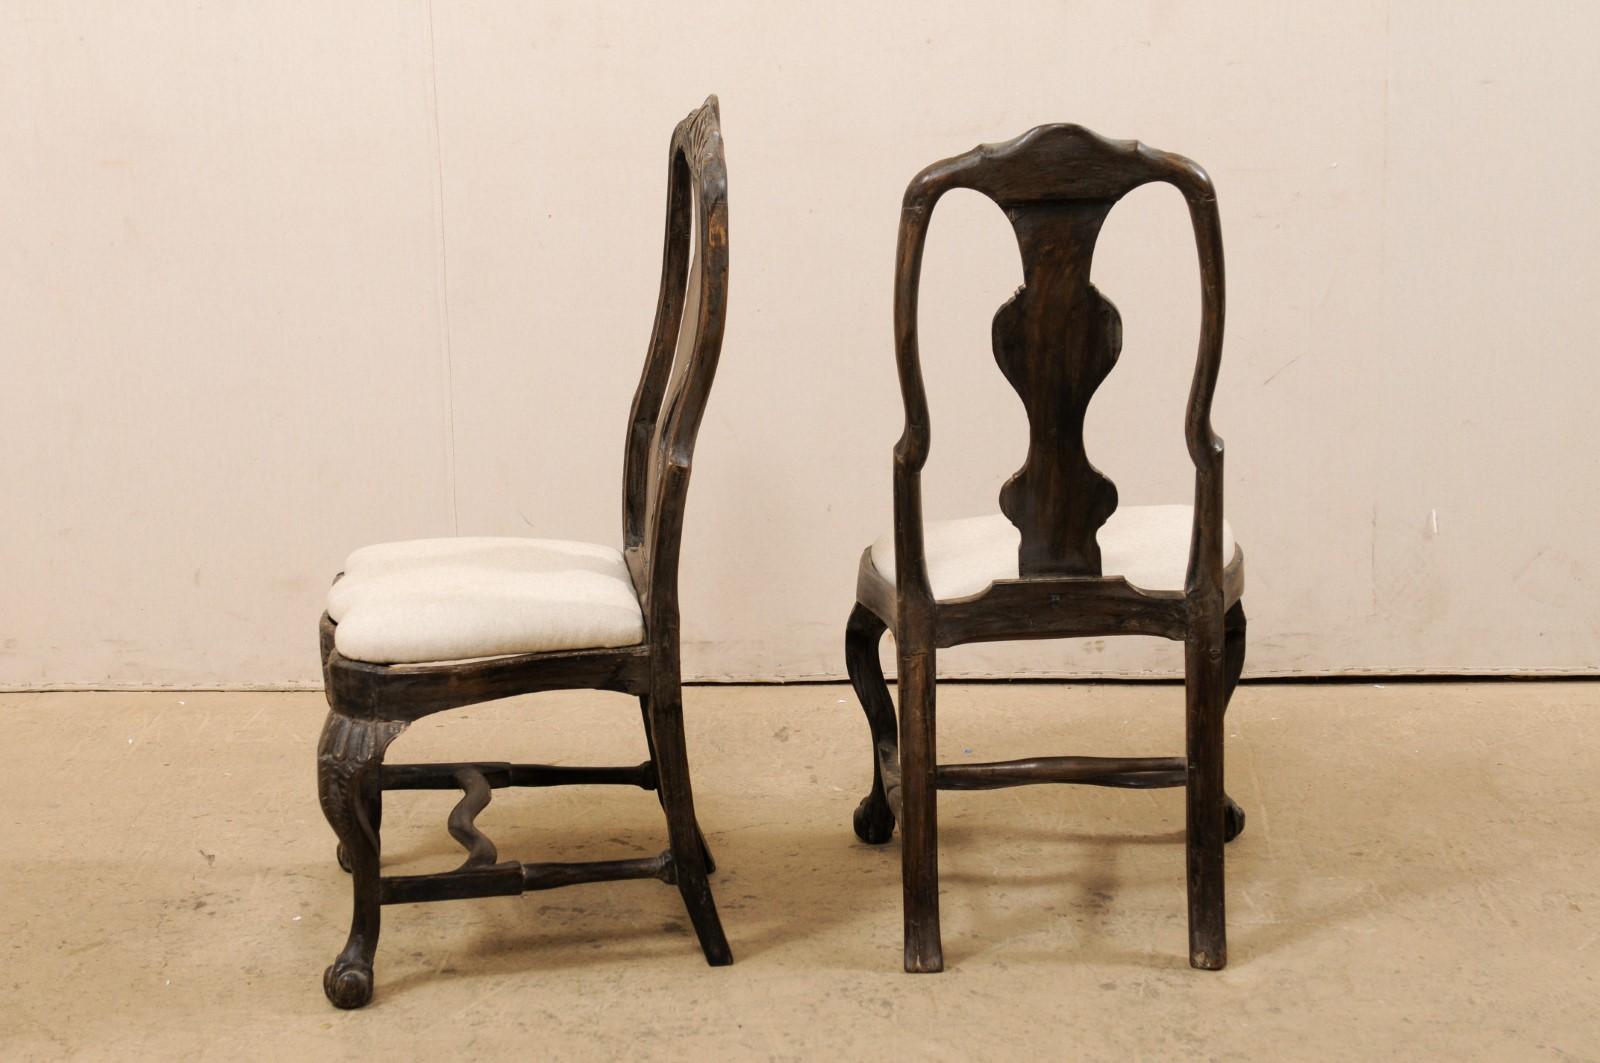 Pair of Swedish Period Rococo Carved-Wood Side Chairs, 18th Century For Sale 4